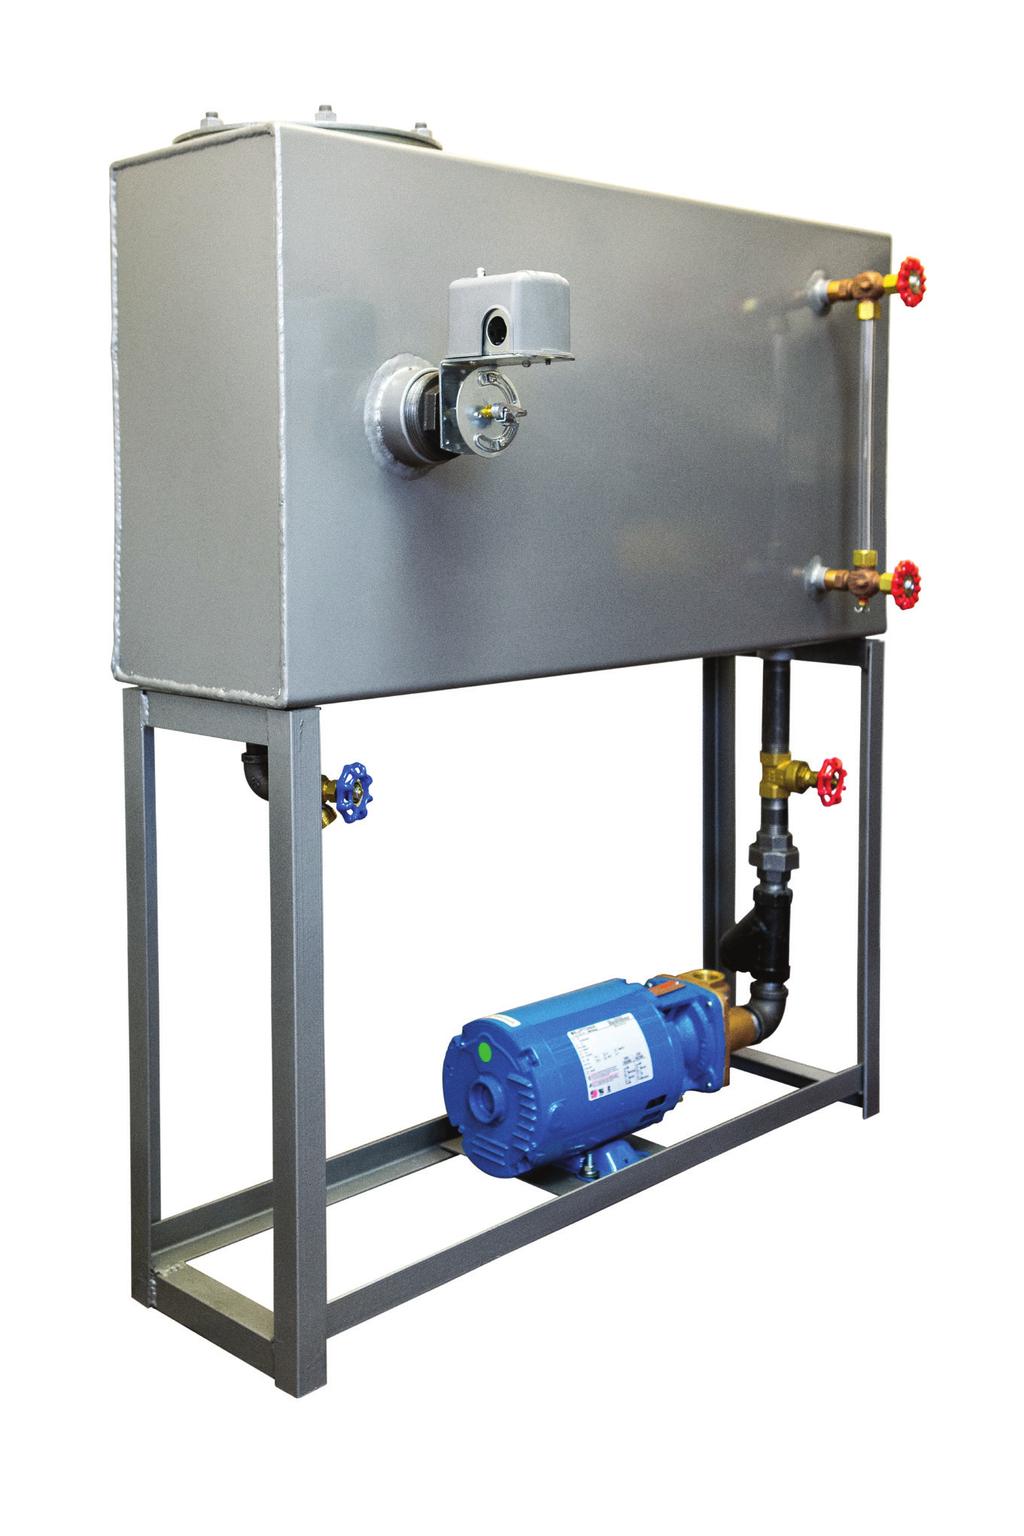 RECTANGULAR RETURN SYSTEMS BLOW OFF SEPARATORS 10 TANK DIMENSIONS GALLON CAPACITY NON CODE BLOW-OFF SEPARATORS 36L x 10W x 18H 28 36L x 12W x 18H 34 36L x 12W x 24H 45 Space saver design Available in